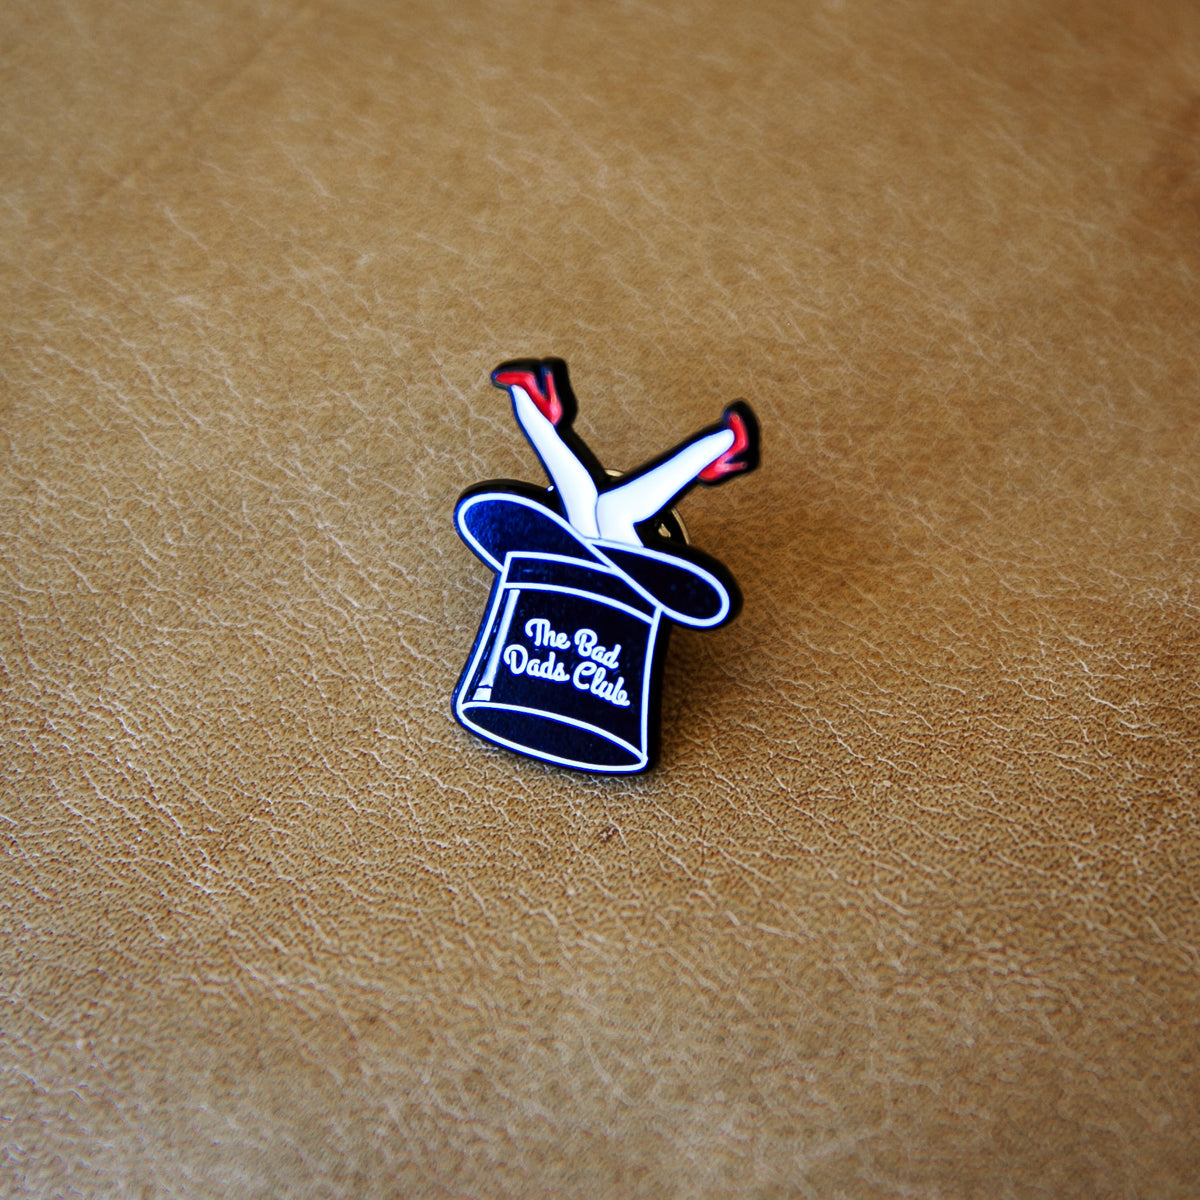 BAD DADS TOP HAT PIN - THE BAD DADS CLUB